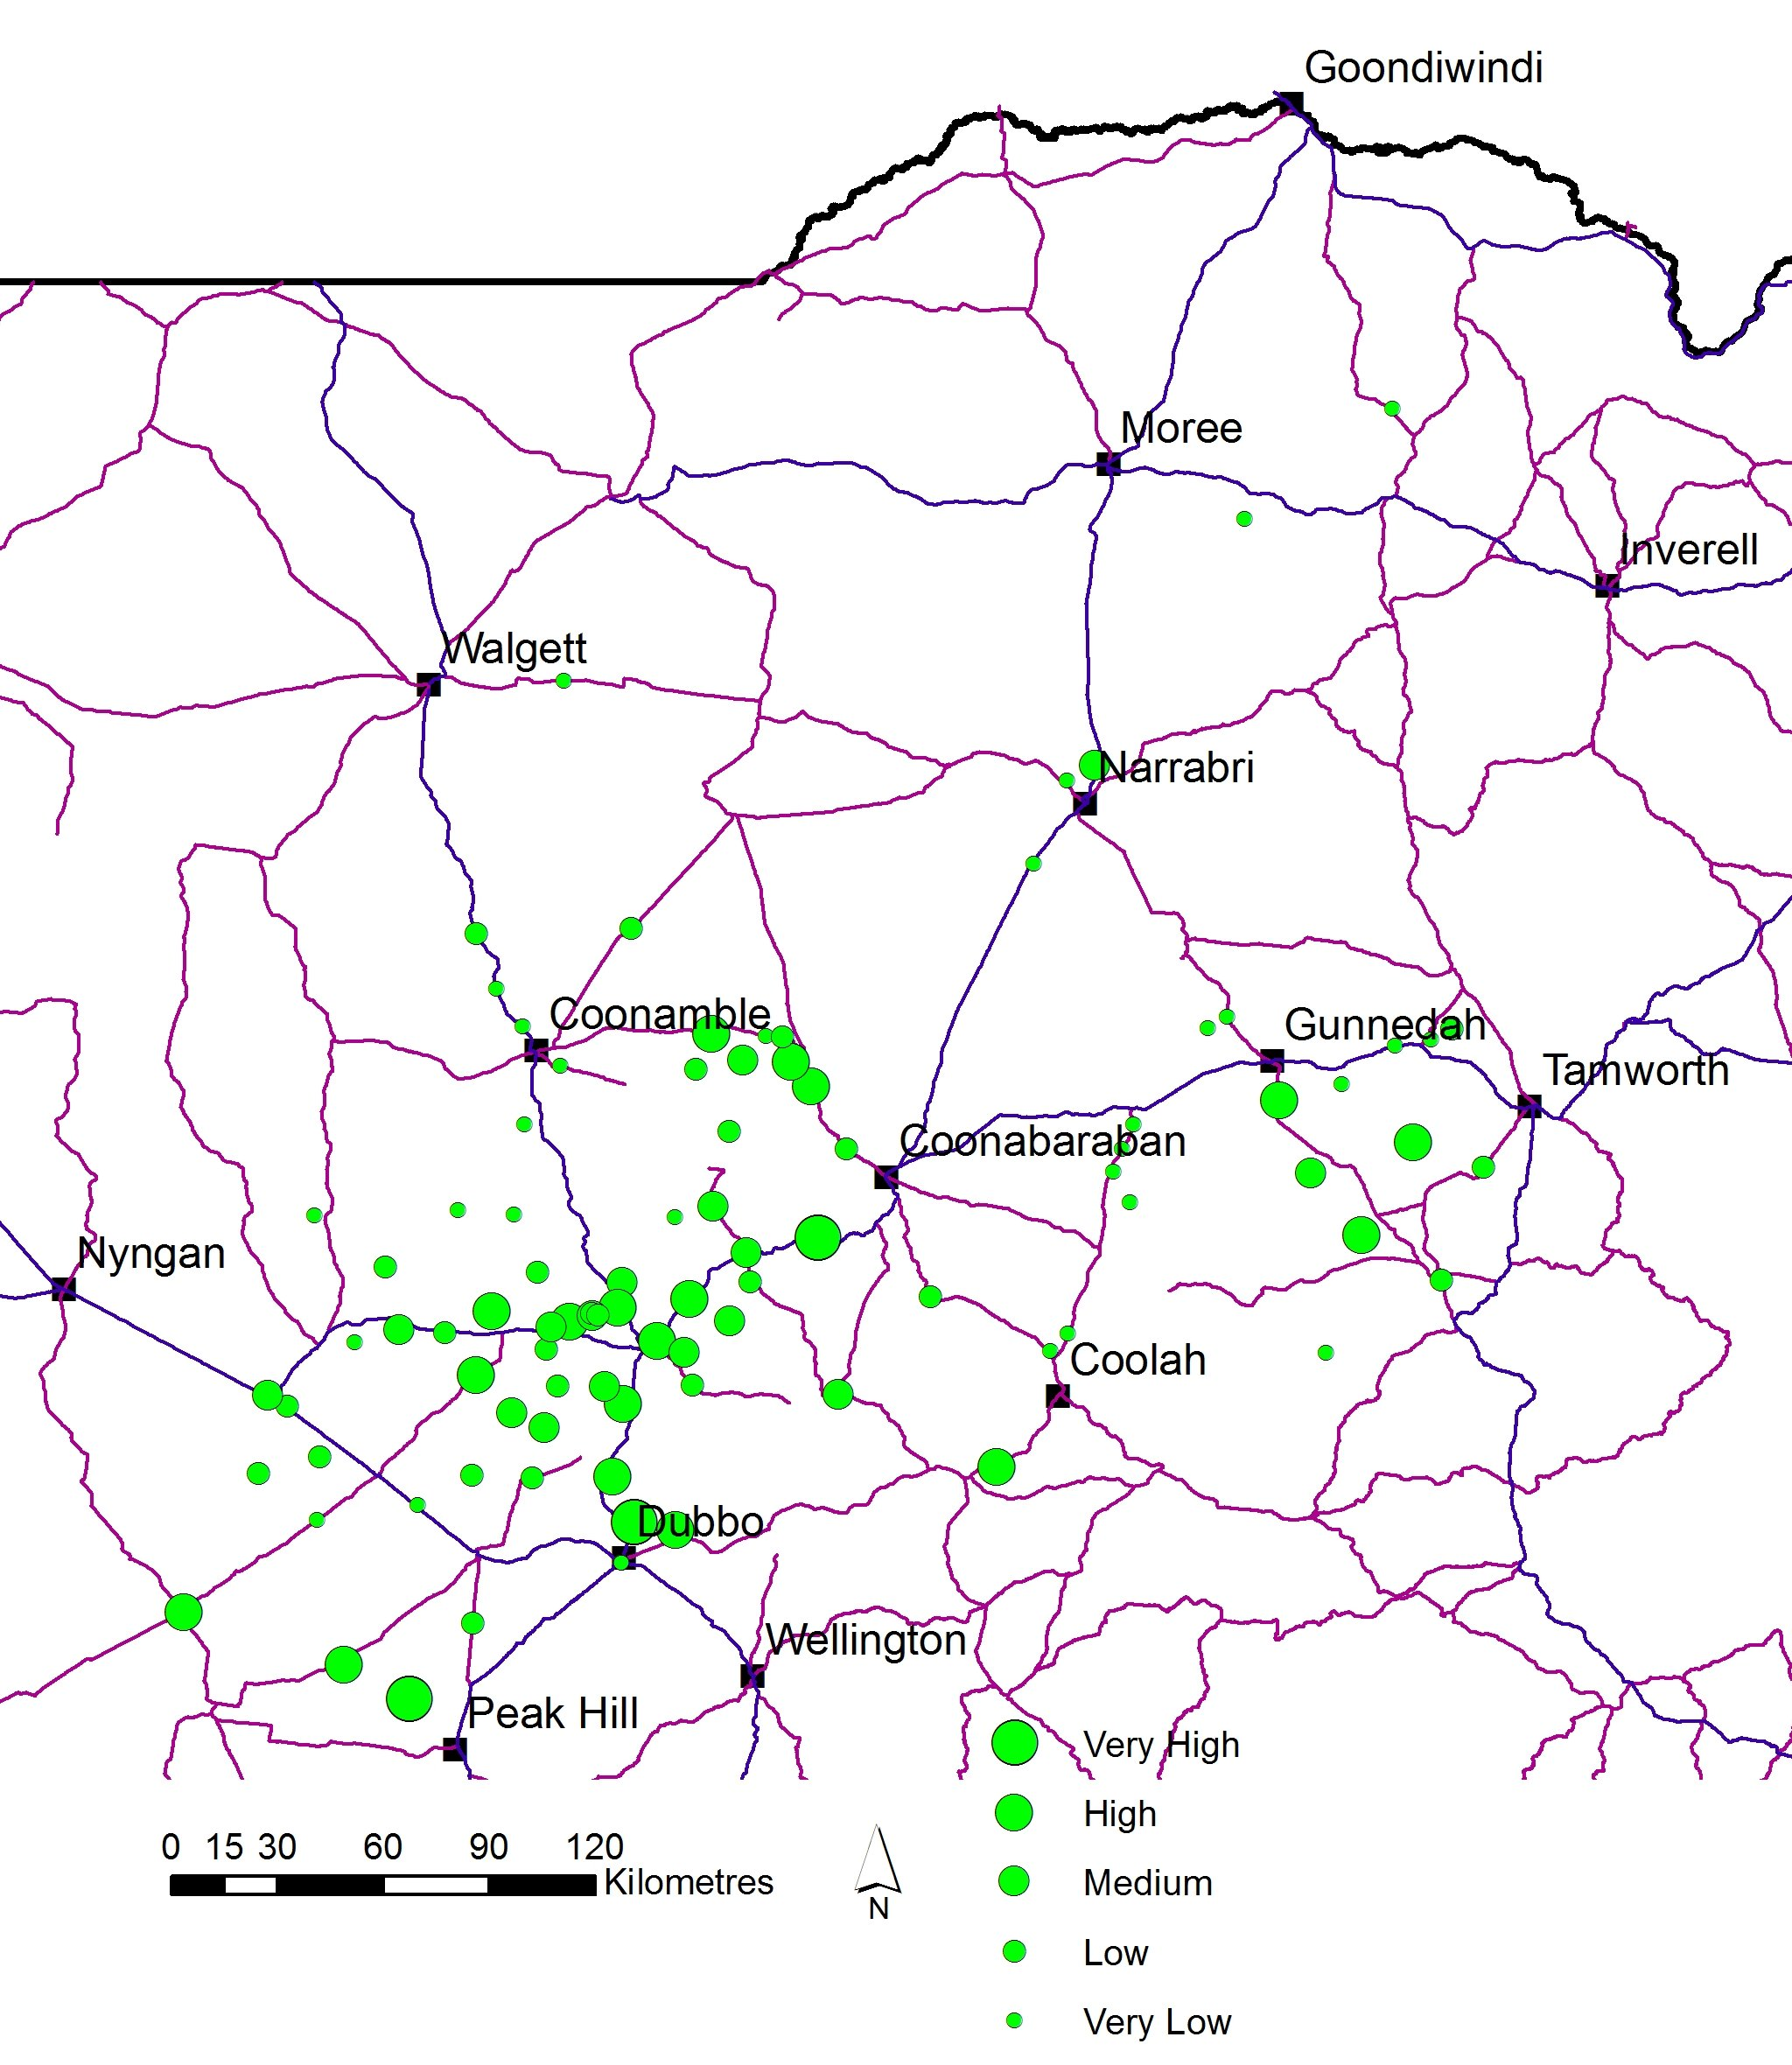 Figure 1 is a map of NSW showing collection locations of ryegrass samples and population density.